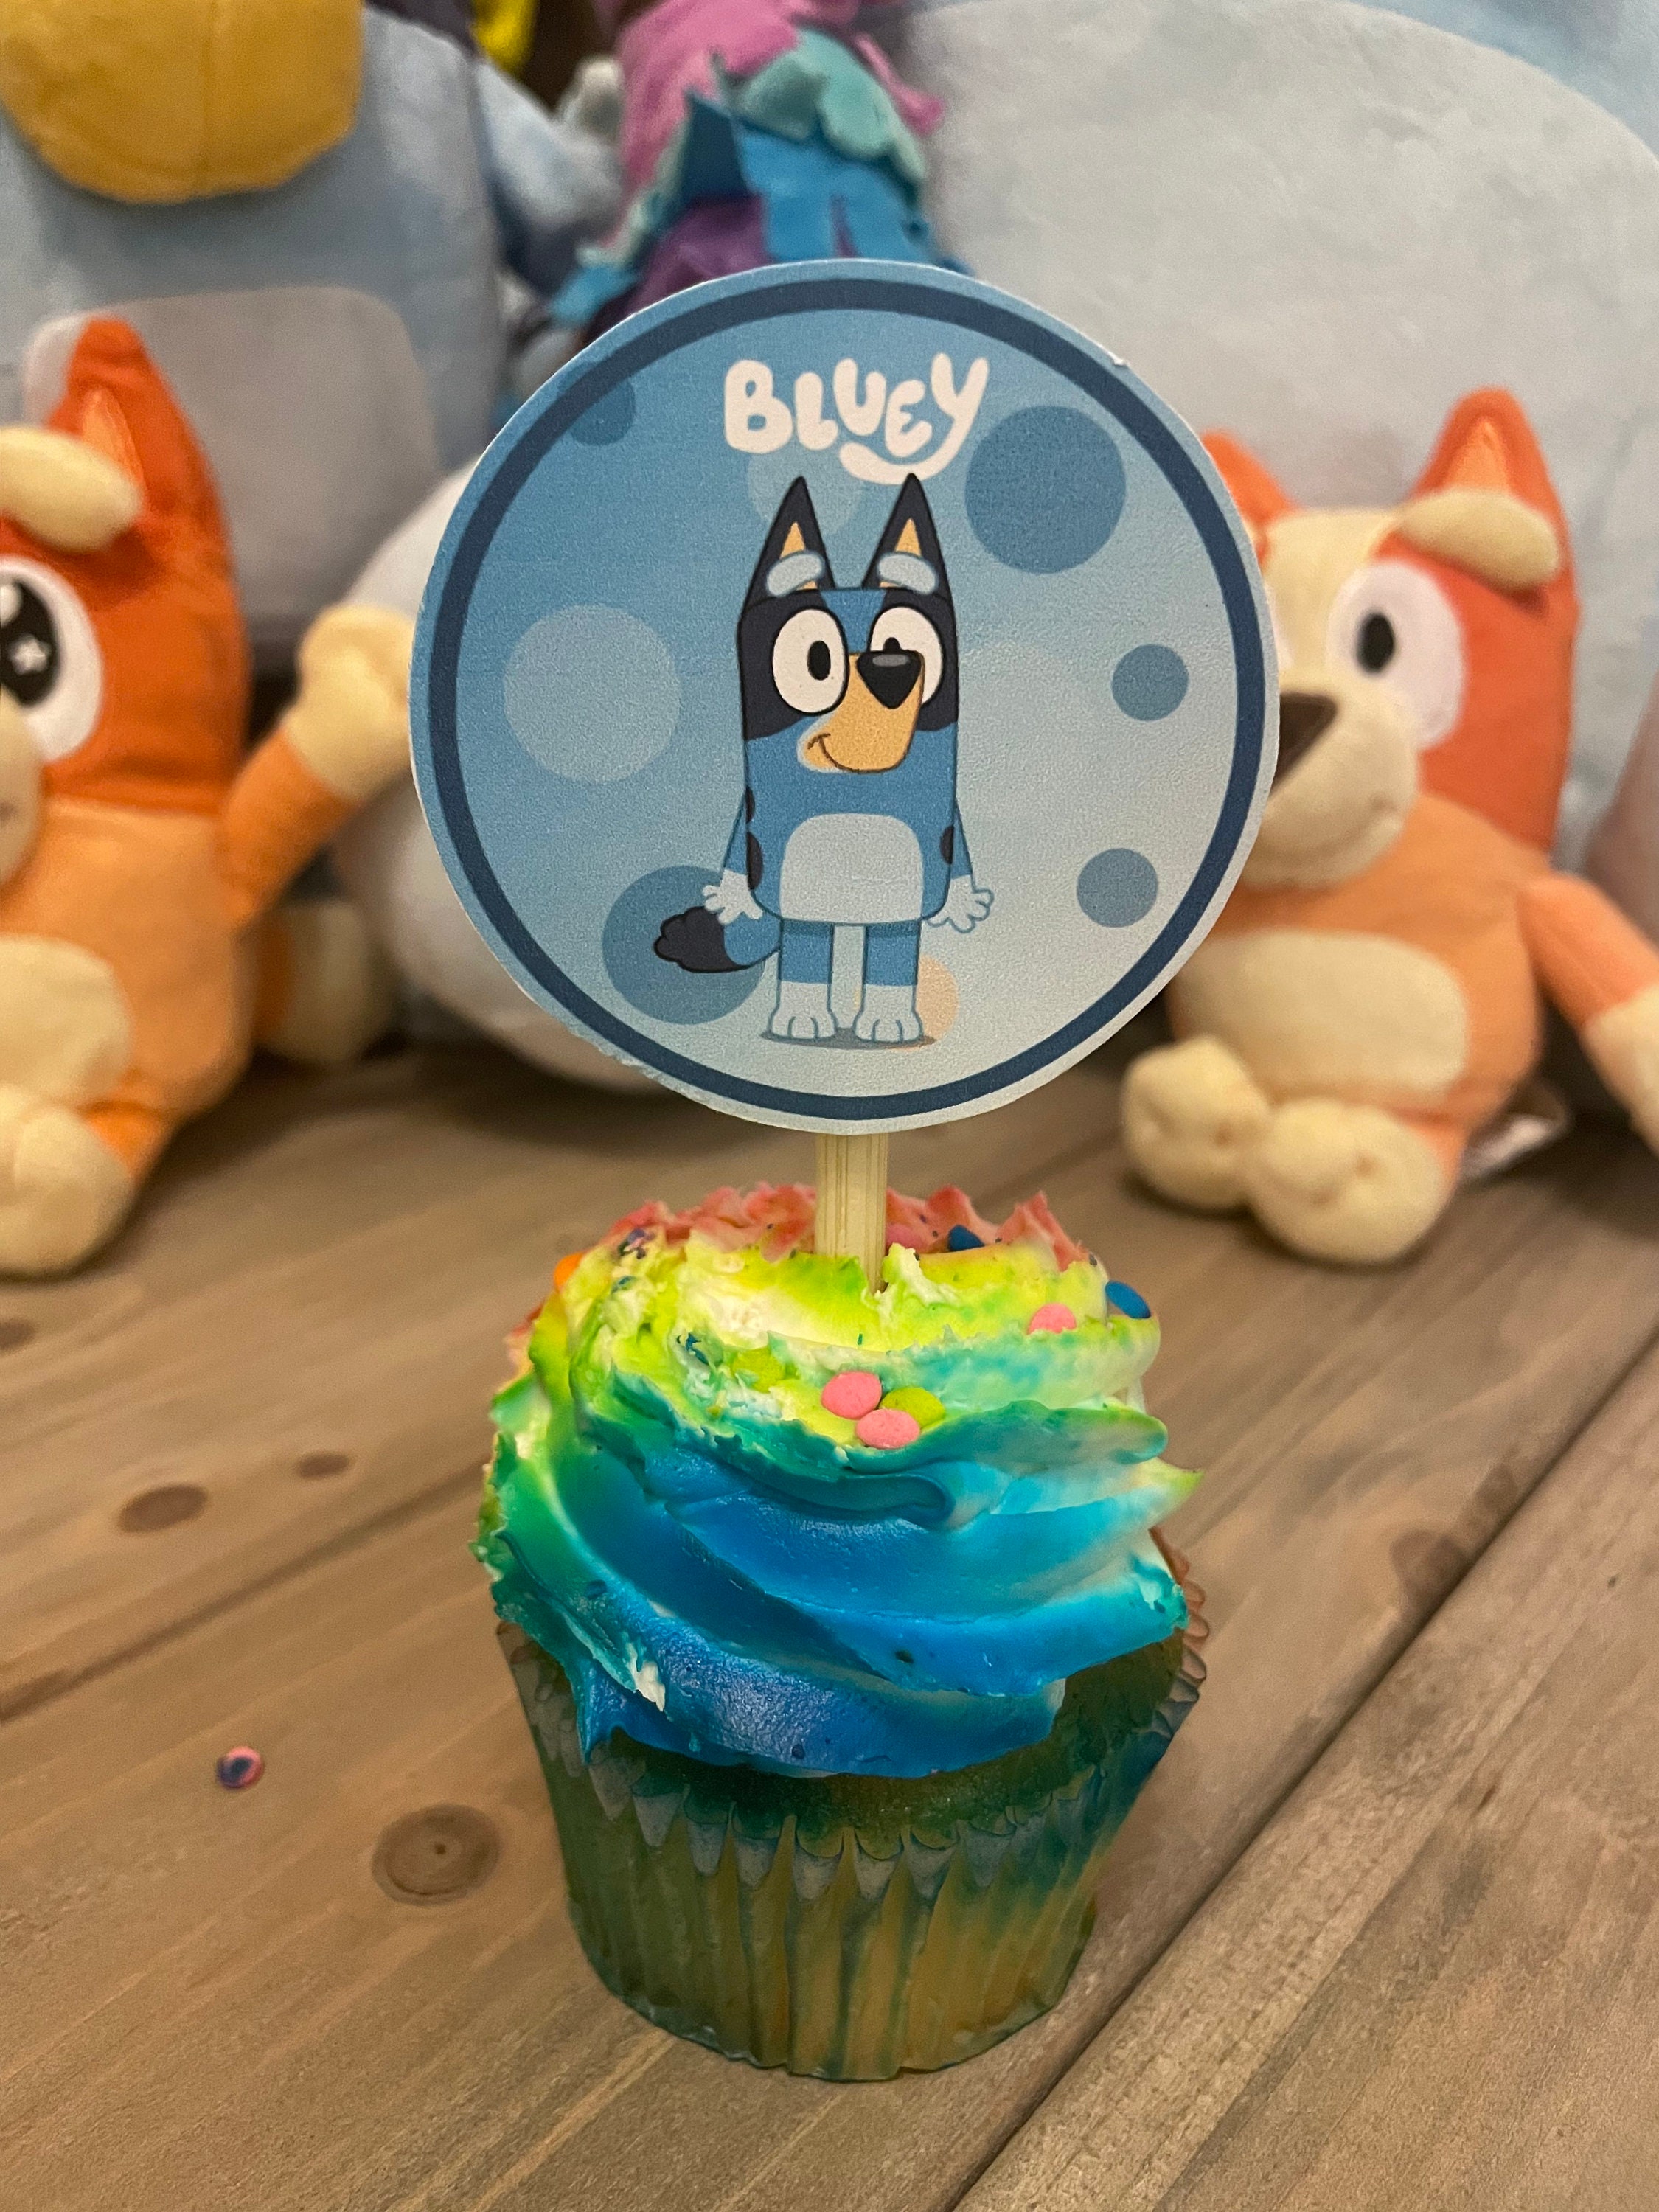 Bluey and Bingo Birthday Party Set Cupcake Stand Centerpiece and